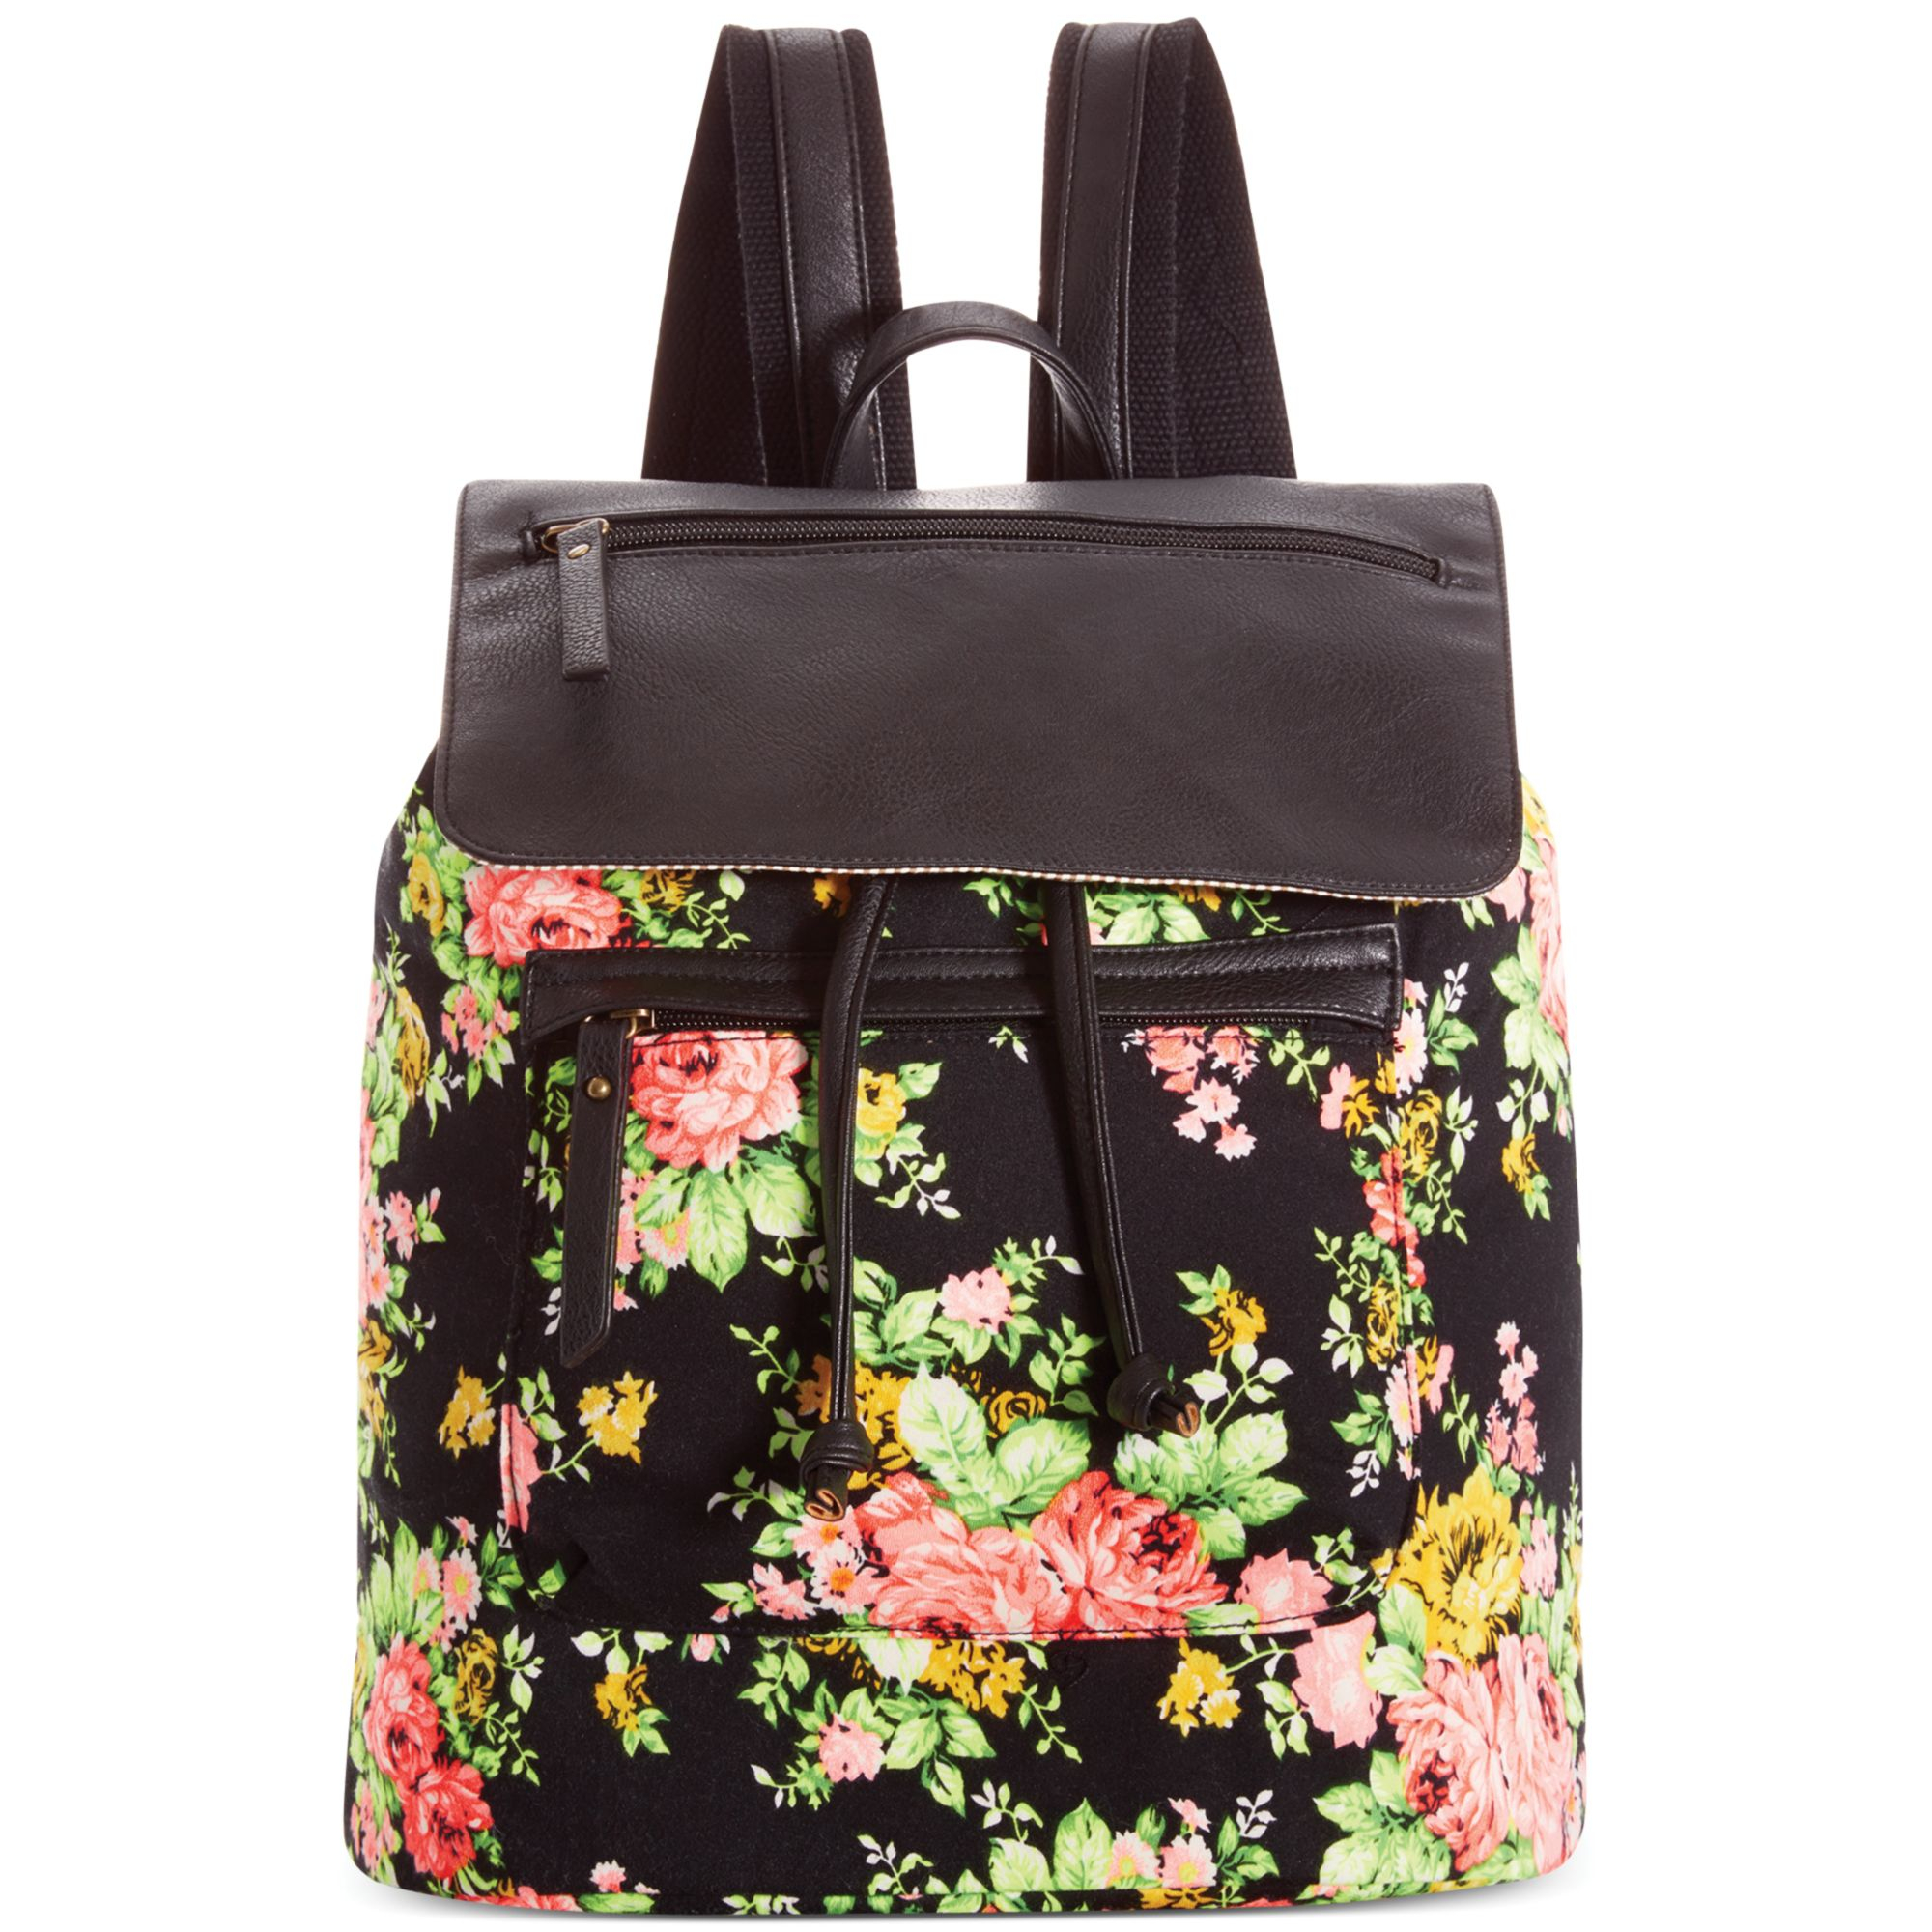 Madden Girl Posey Backpack in Floral (Black Floral) | Lyst